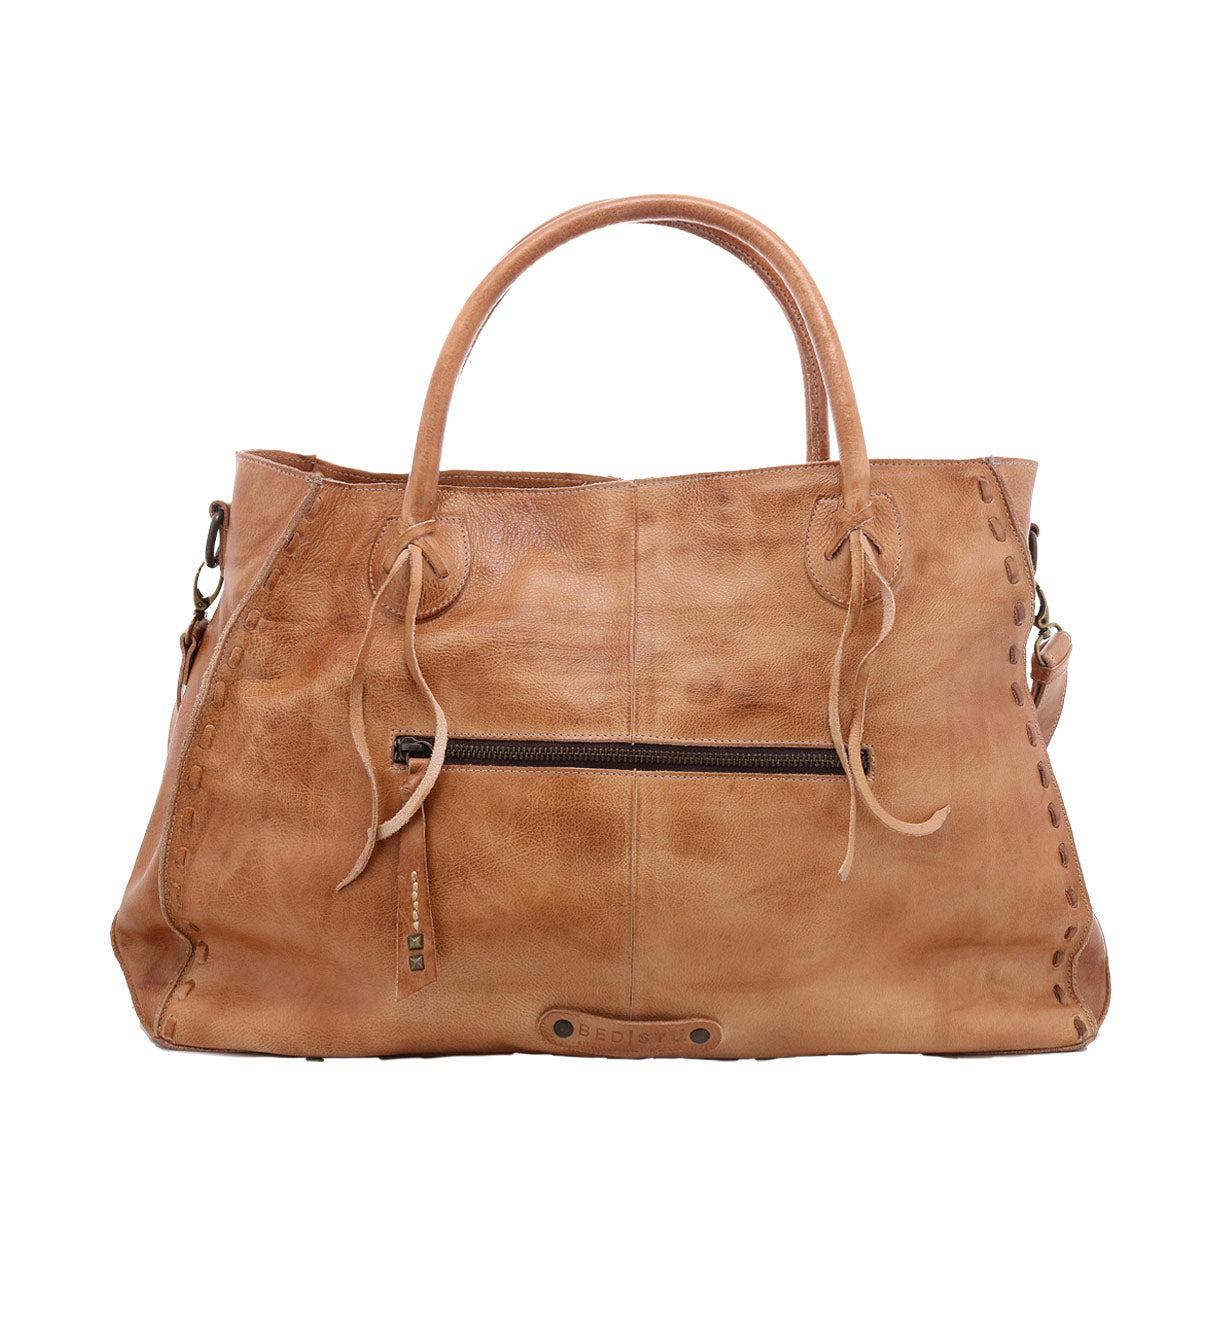 The Rockaway leather tote bag by Bed Stu.